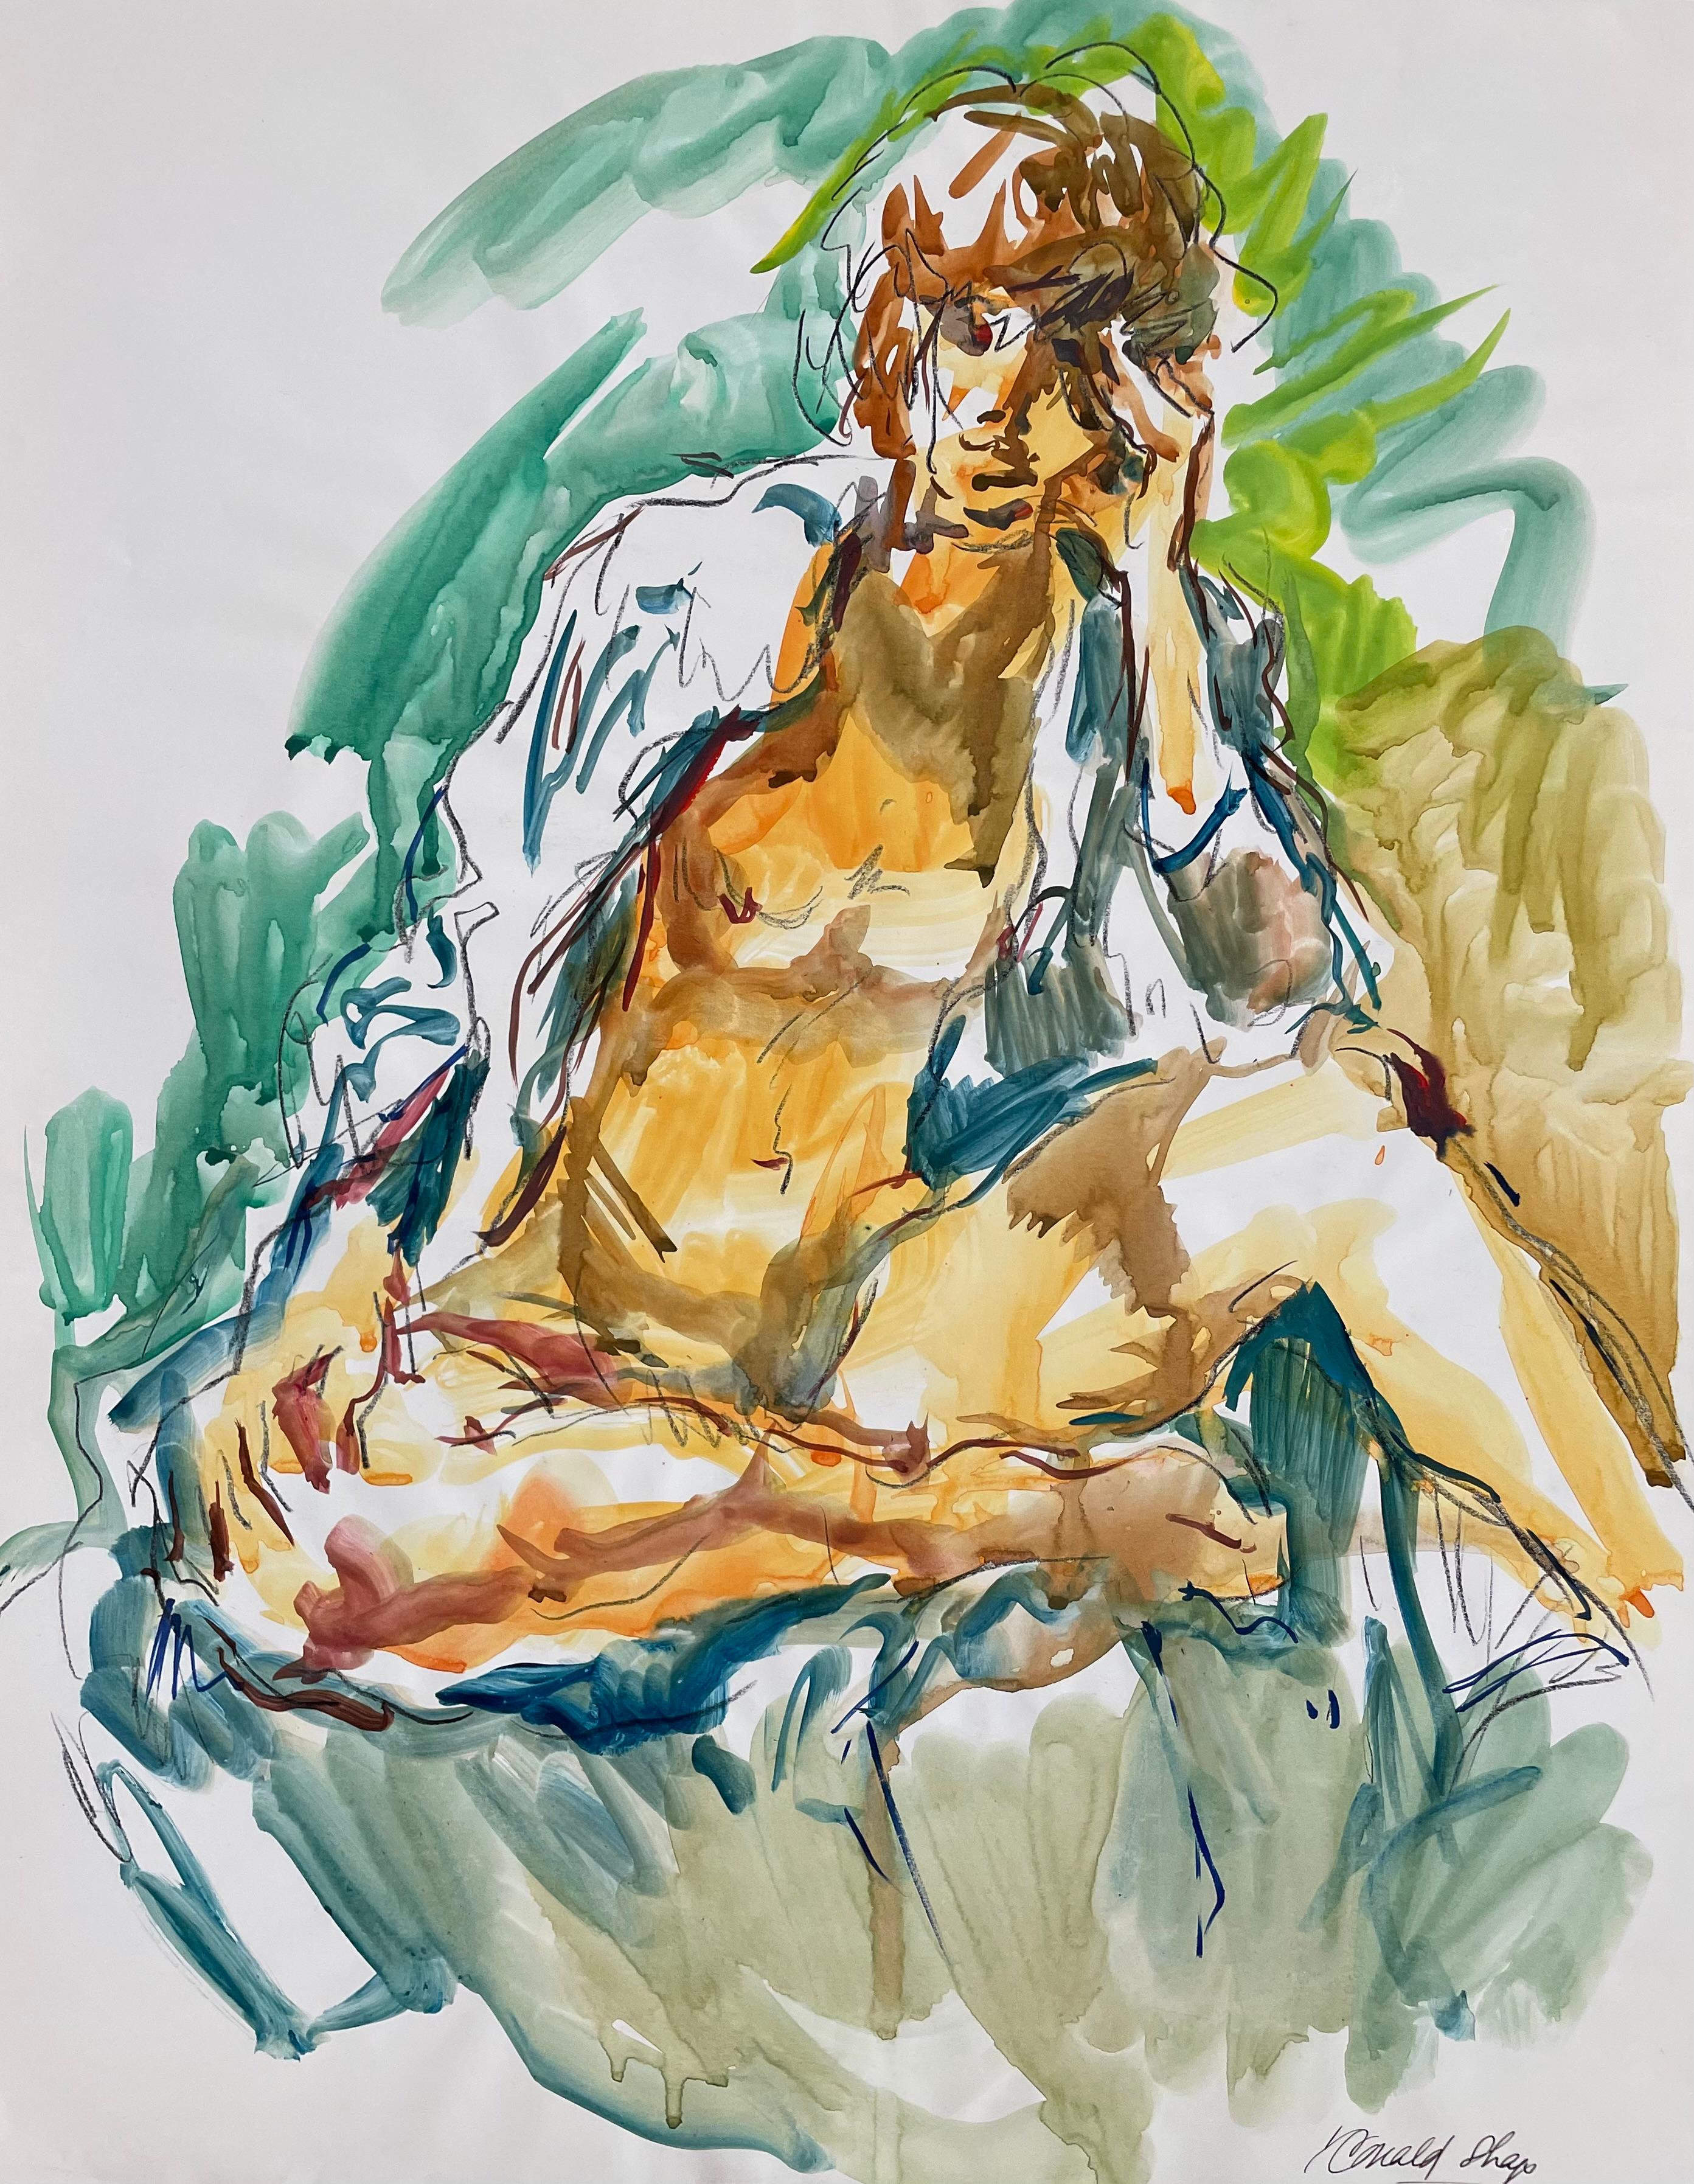 Original oil pastel and gouache figure drawing by celebrated, twentieth-century California landscape painter, Ronald Shap. Sketch of nude woman sitting with washes of teal, cobalt blue and brown. 23x17.5 inches on paper. Signed.

This piece has